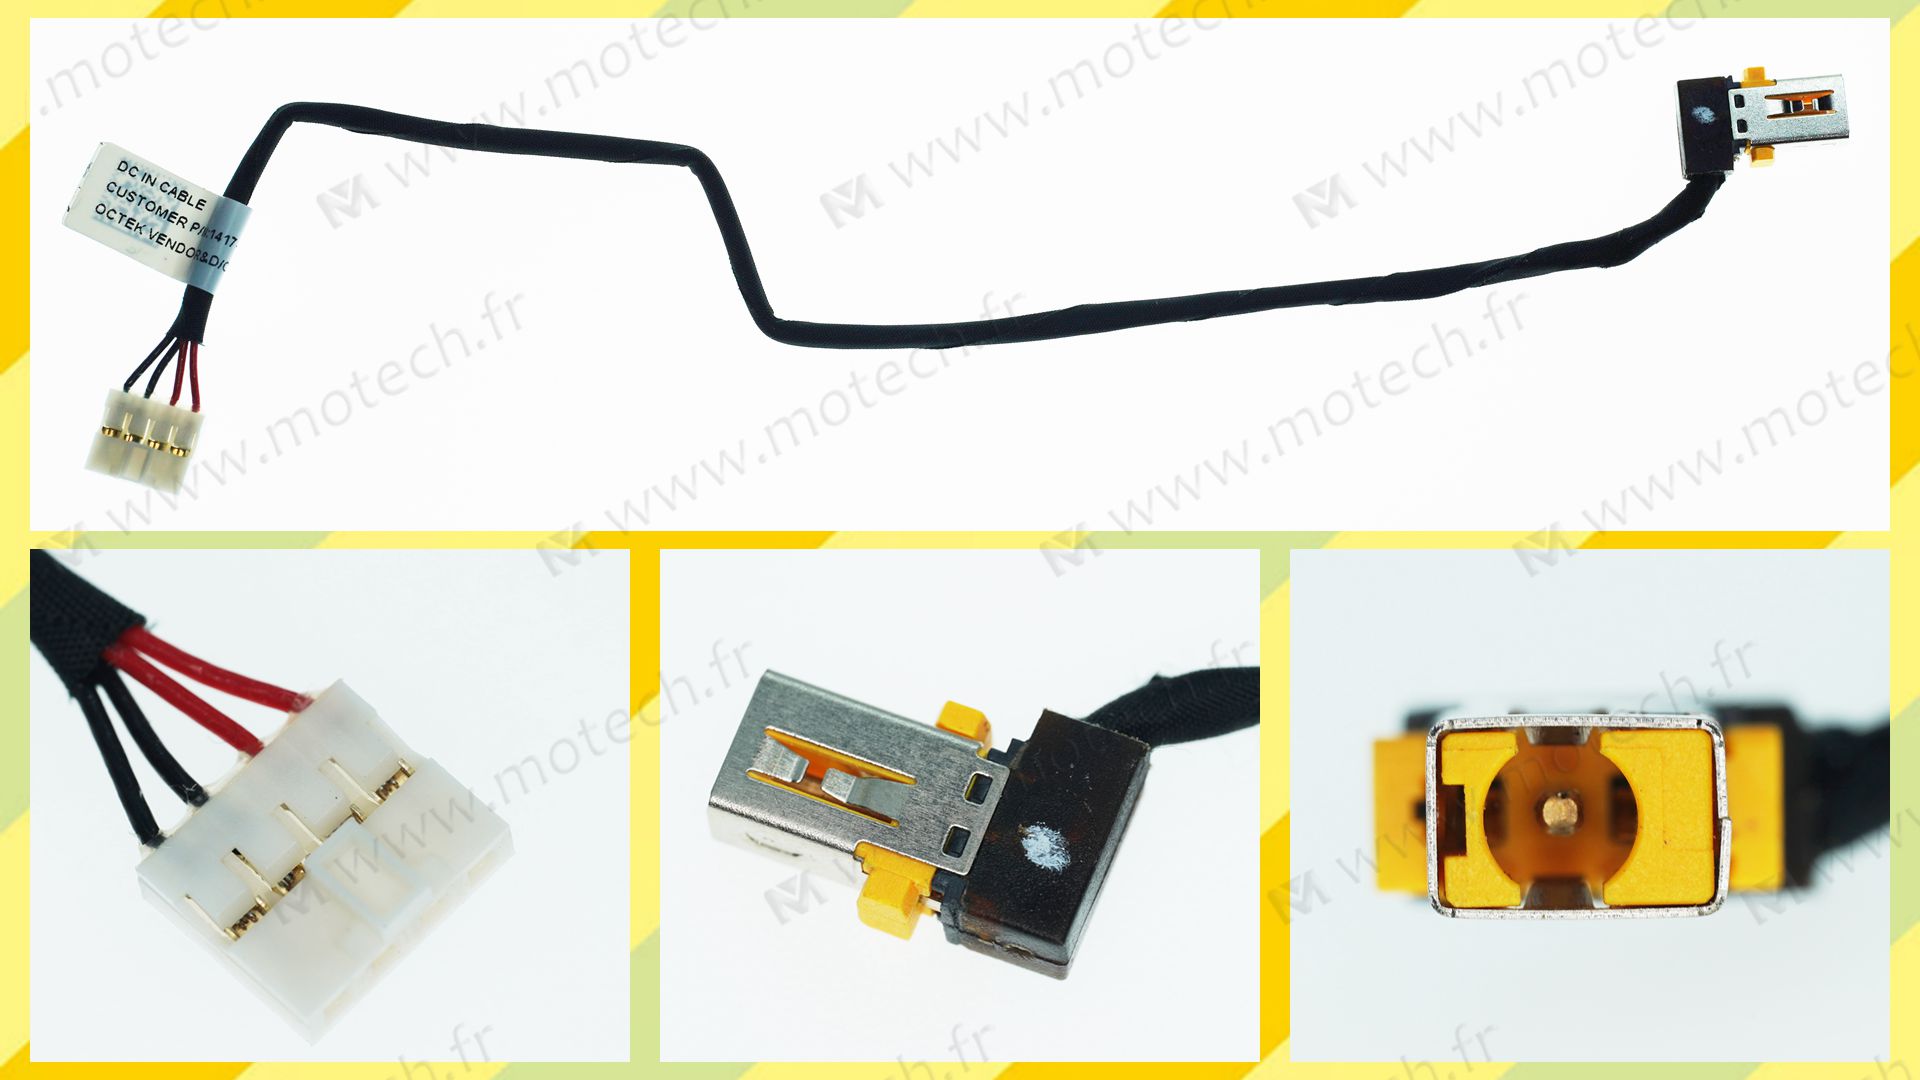 Acer TMB114-21 charging connector, Acer TMB114-21 DC Power Jack, Acer TMB114-21 DC IN Cable, Acer TMB114-21 Power Jack, Acer TMB114-21 plug, Acer TMB114-21 Jack socket, Acer TMB114-21 connecteur de charge, 